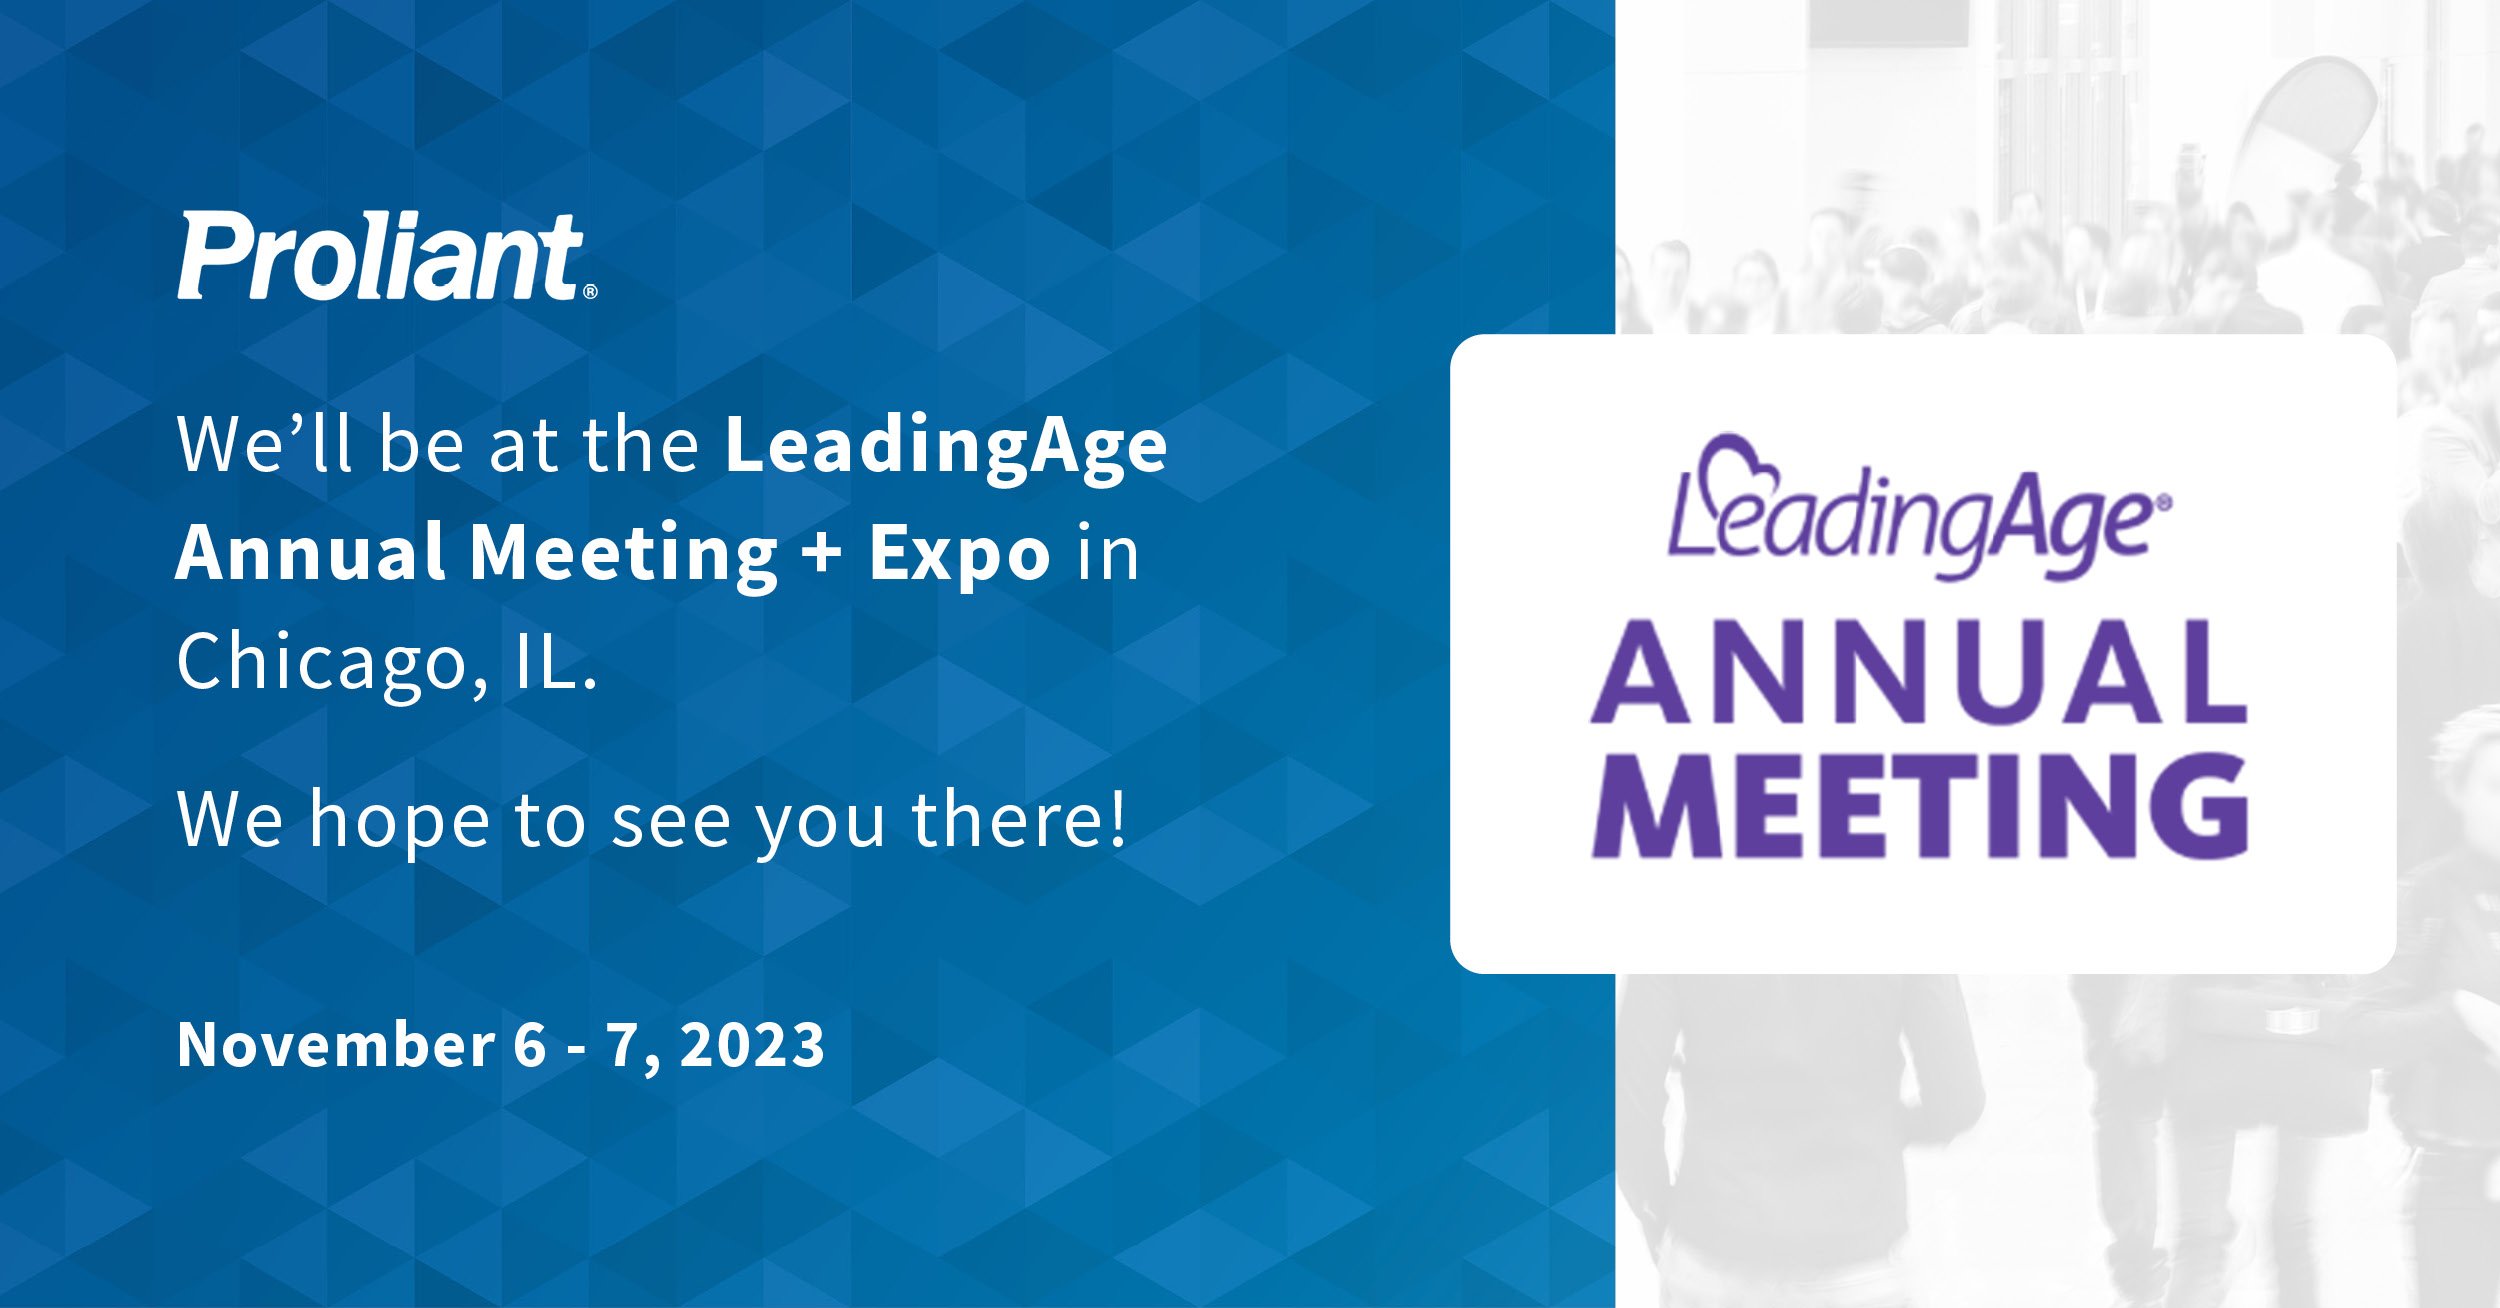 Proliant to Attend the 2023 LeadingAge Annual Meeting